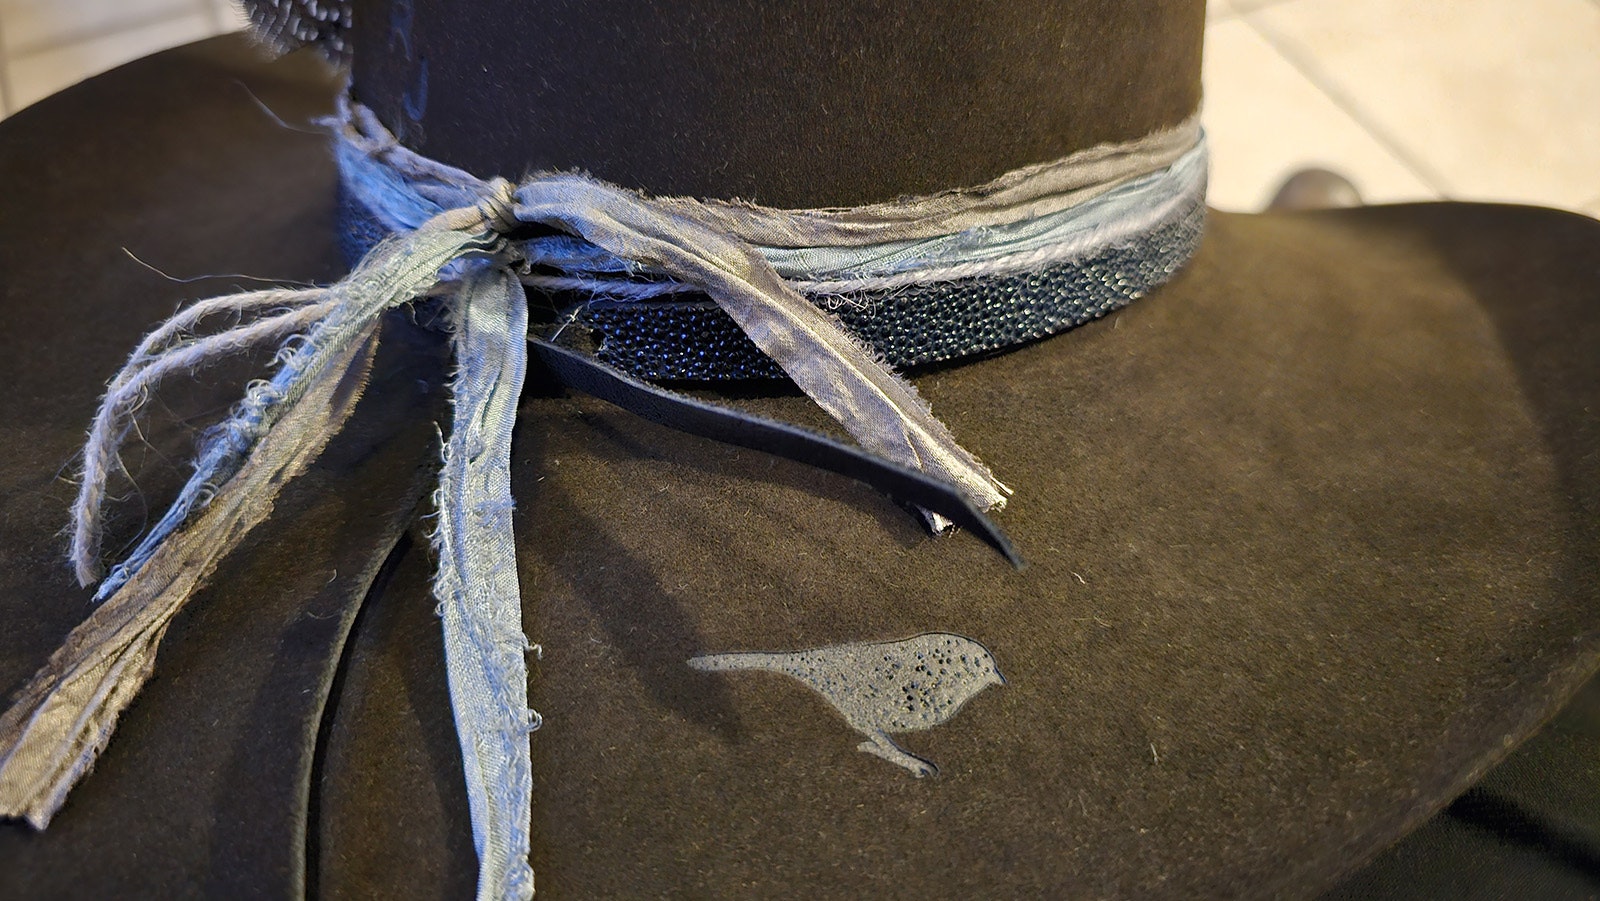 Aquamarine silks for the pisces birthstone, and a little bird logo and initials finish out the hat.